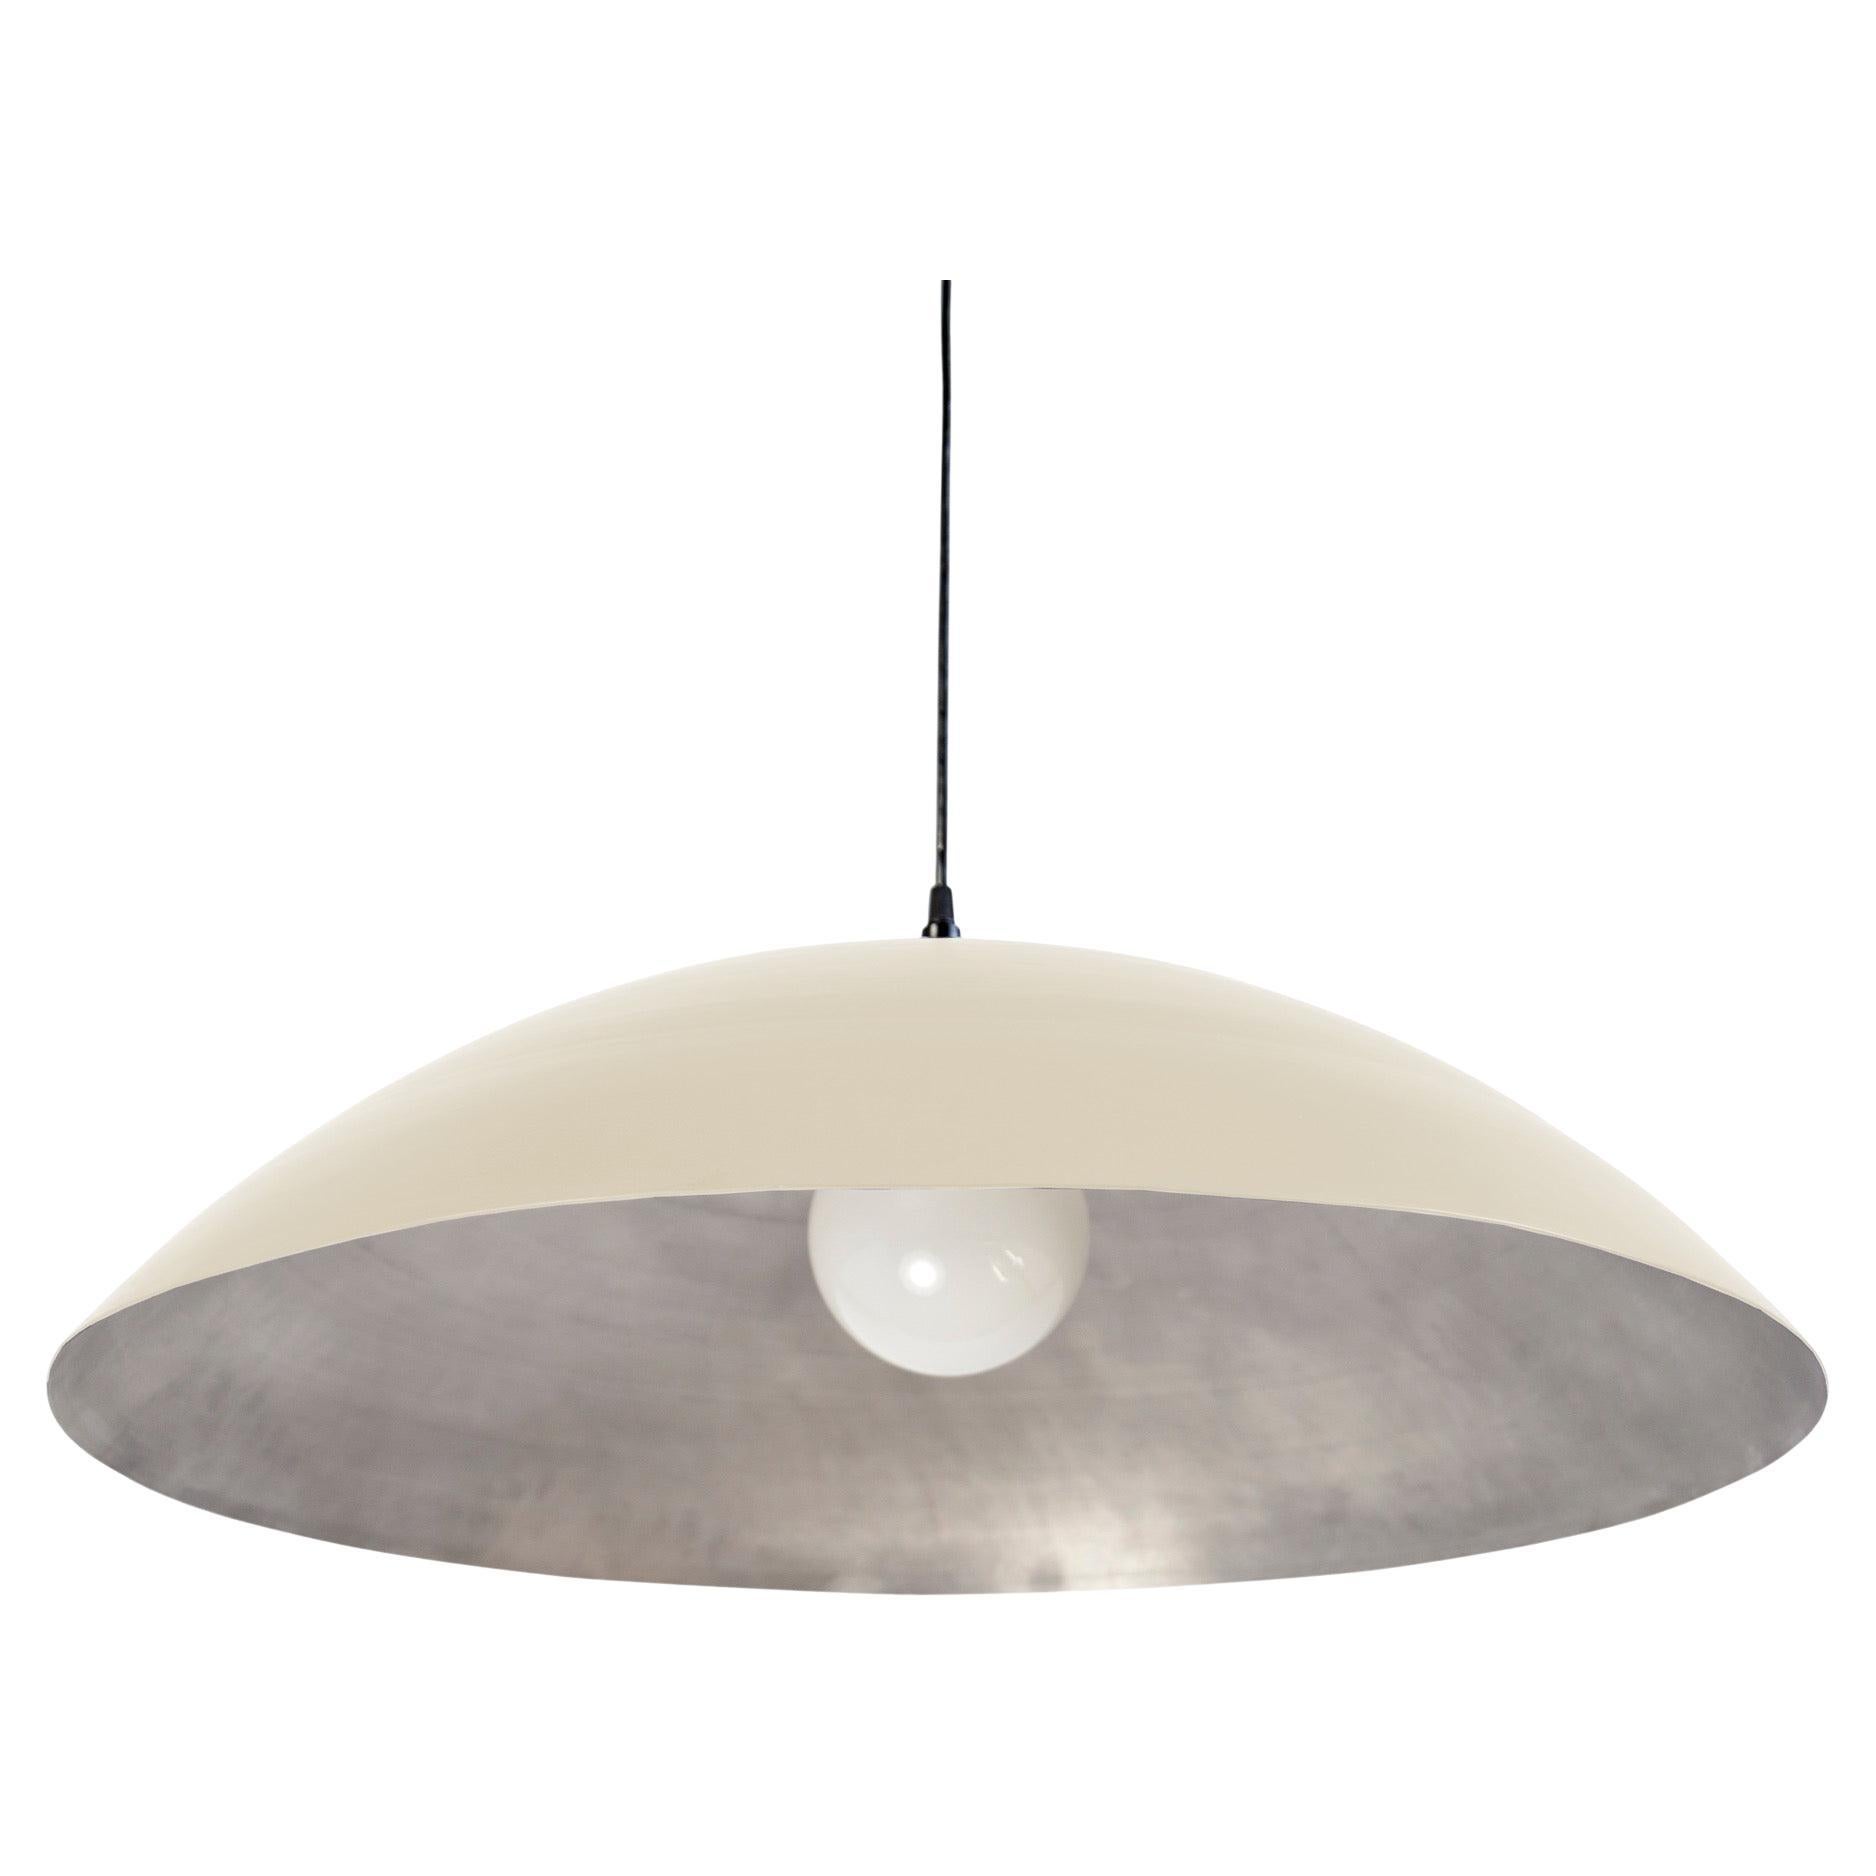 Customizable Oversized Pendant by RESEARCH Lighting, Flat Cream & Silver, MTO For Sale